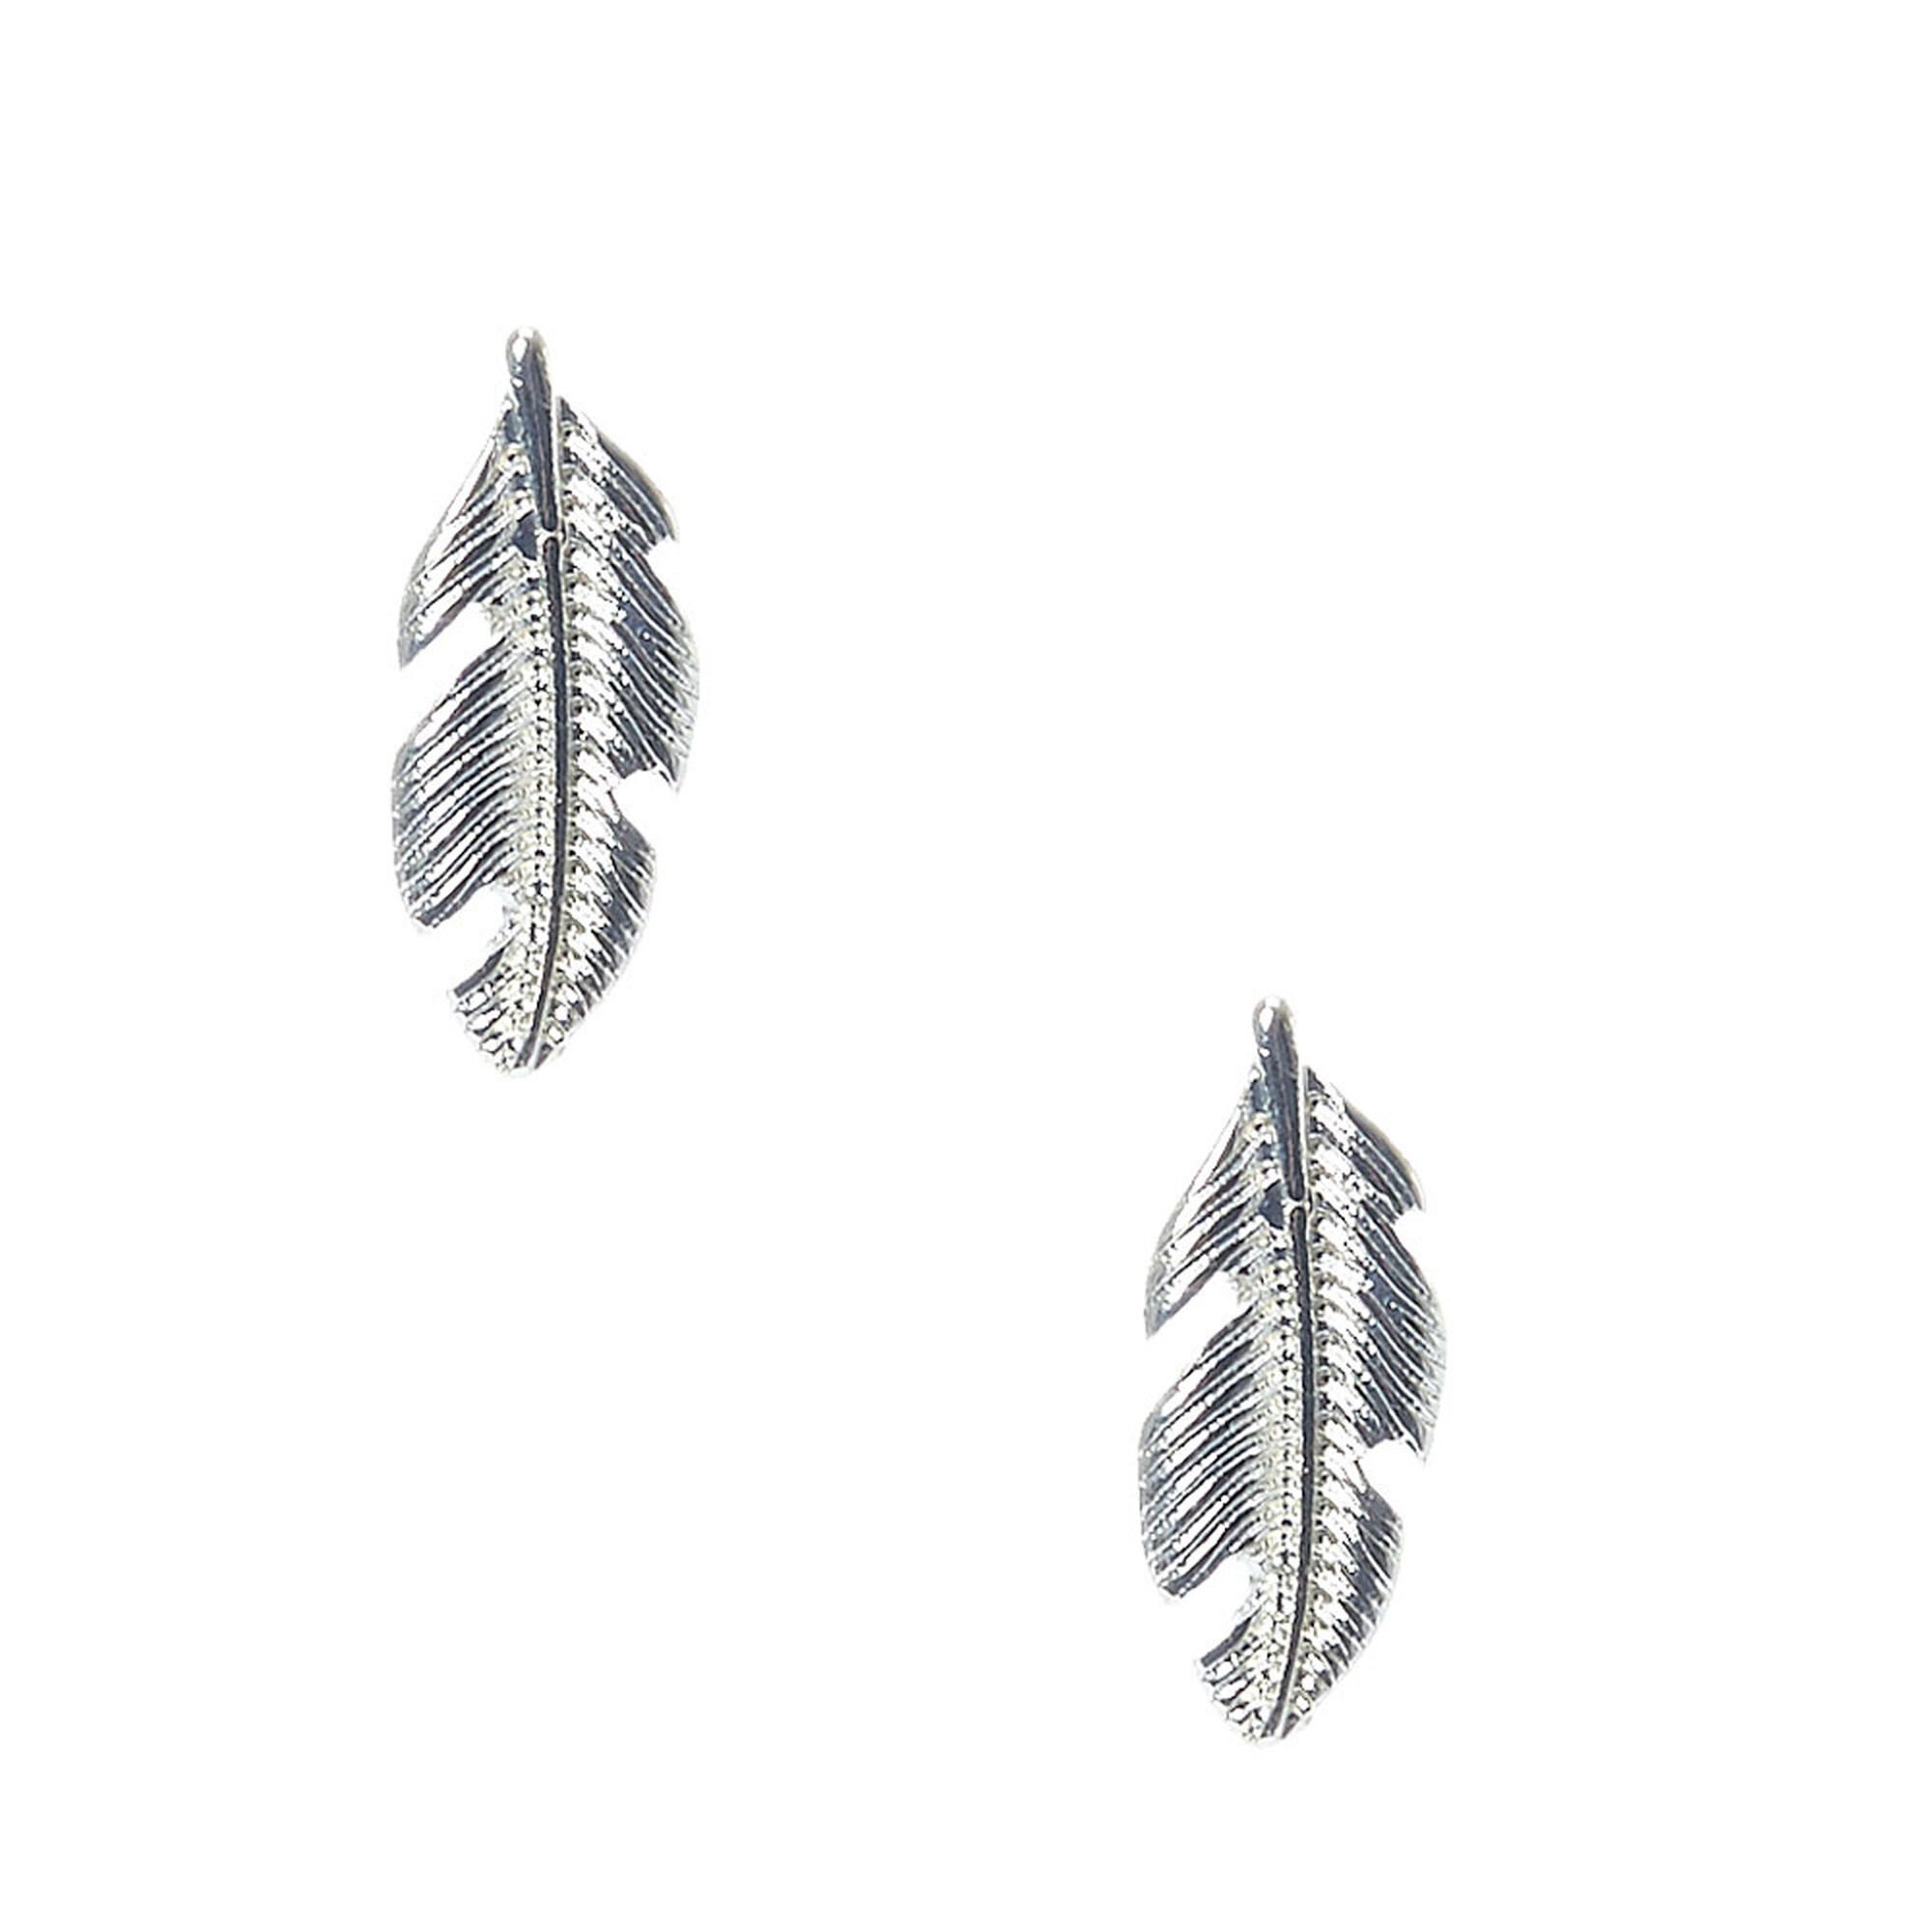 View Claires Tone Leaf Stud Earrings Silver information